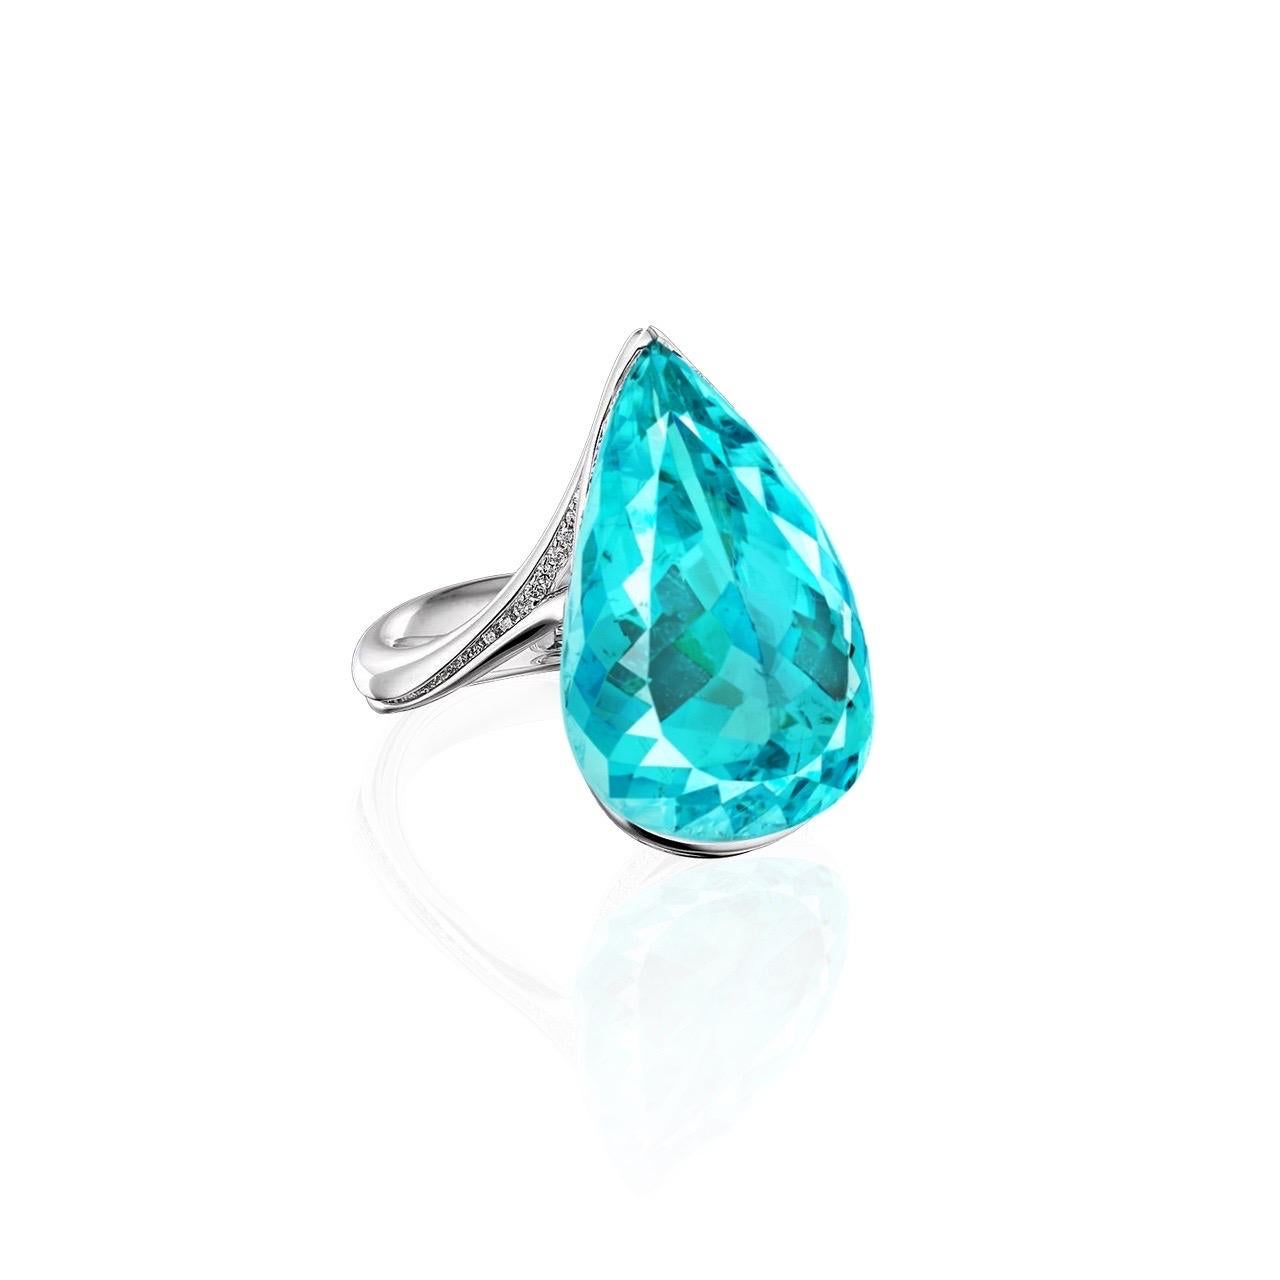 From Emilio Jewelry, a well known and respected wholesaler/dealer located on New York’s iconic Fifth Avenue, 
Featuring a 6.93ct super Paraiba of Green Blue color. 
Please inquire for more images, certificates, and details. Zoom meetings available!